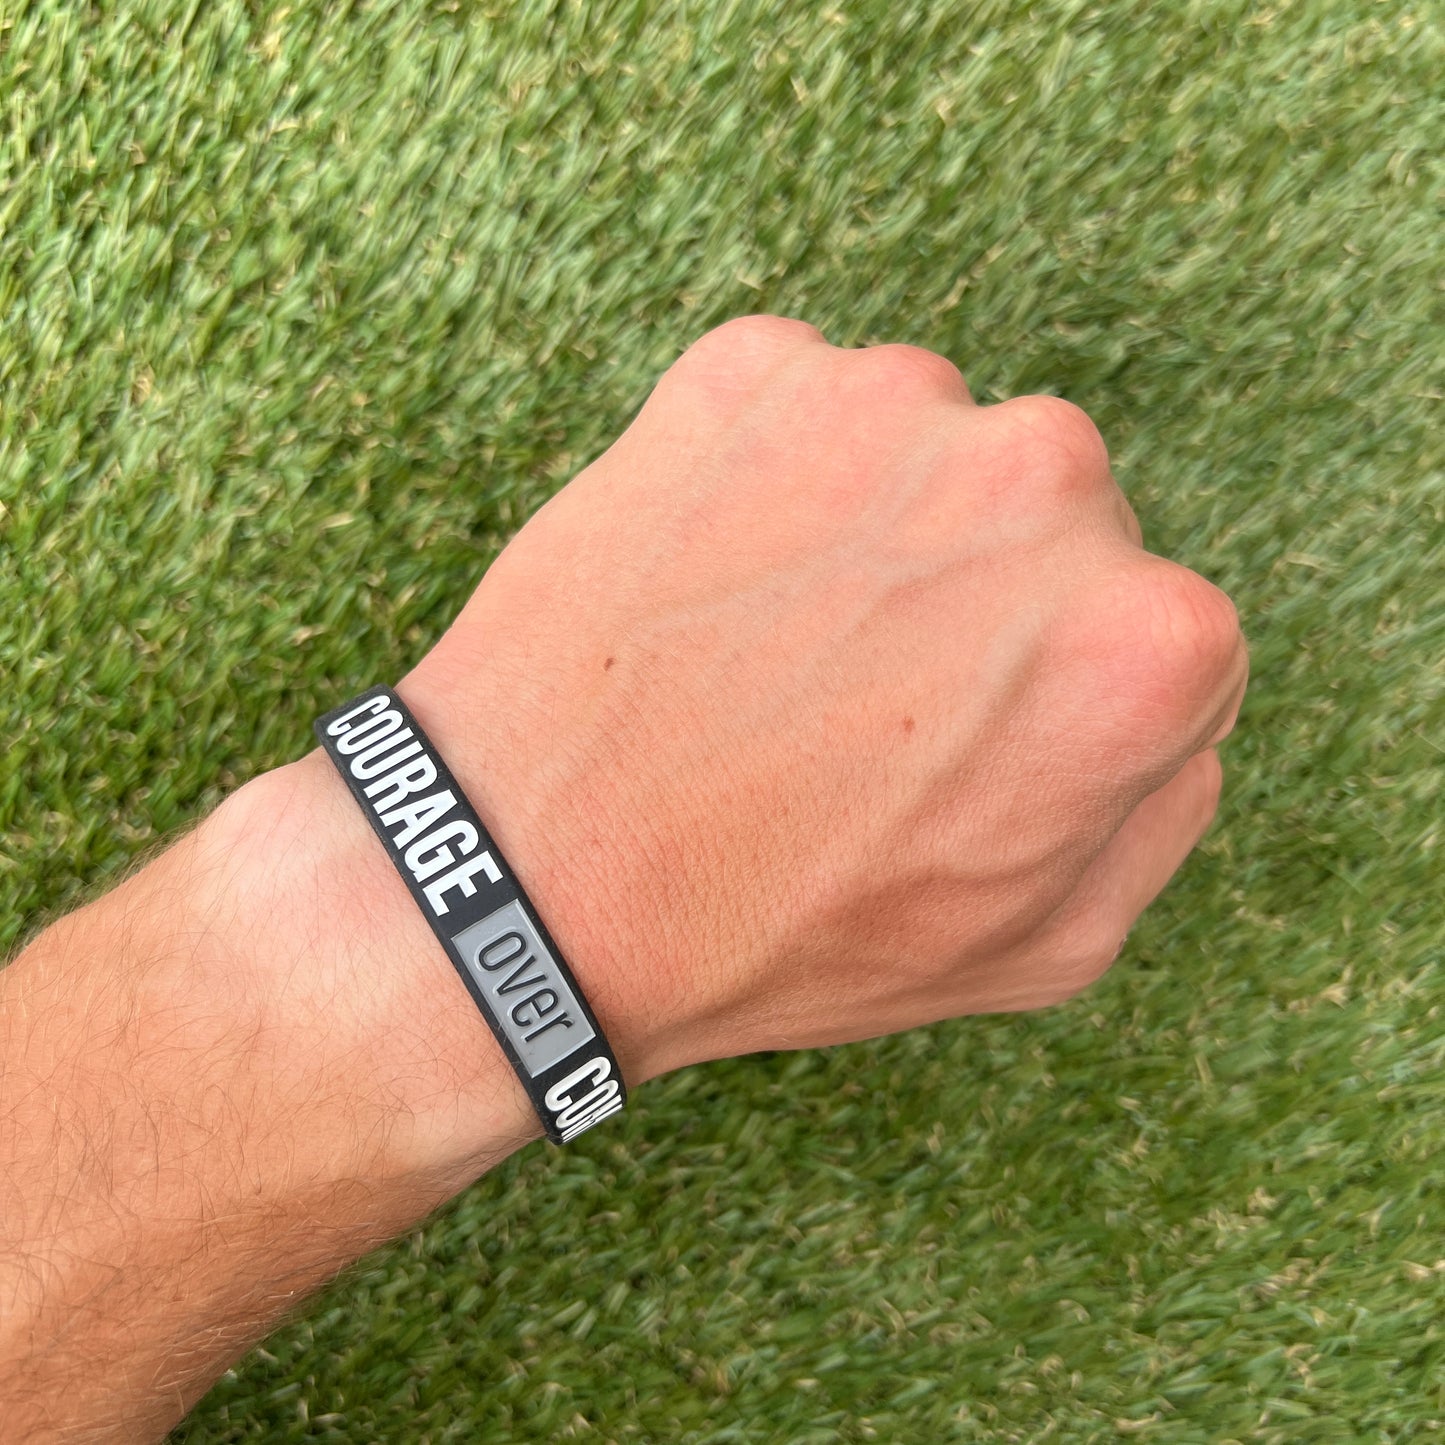 COURAGE OVER COMPROMISE Wristband